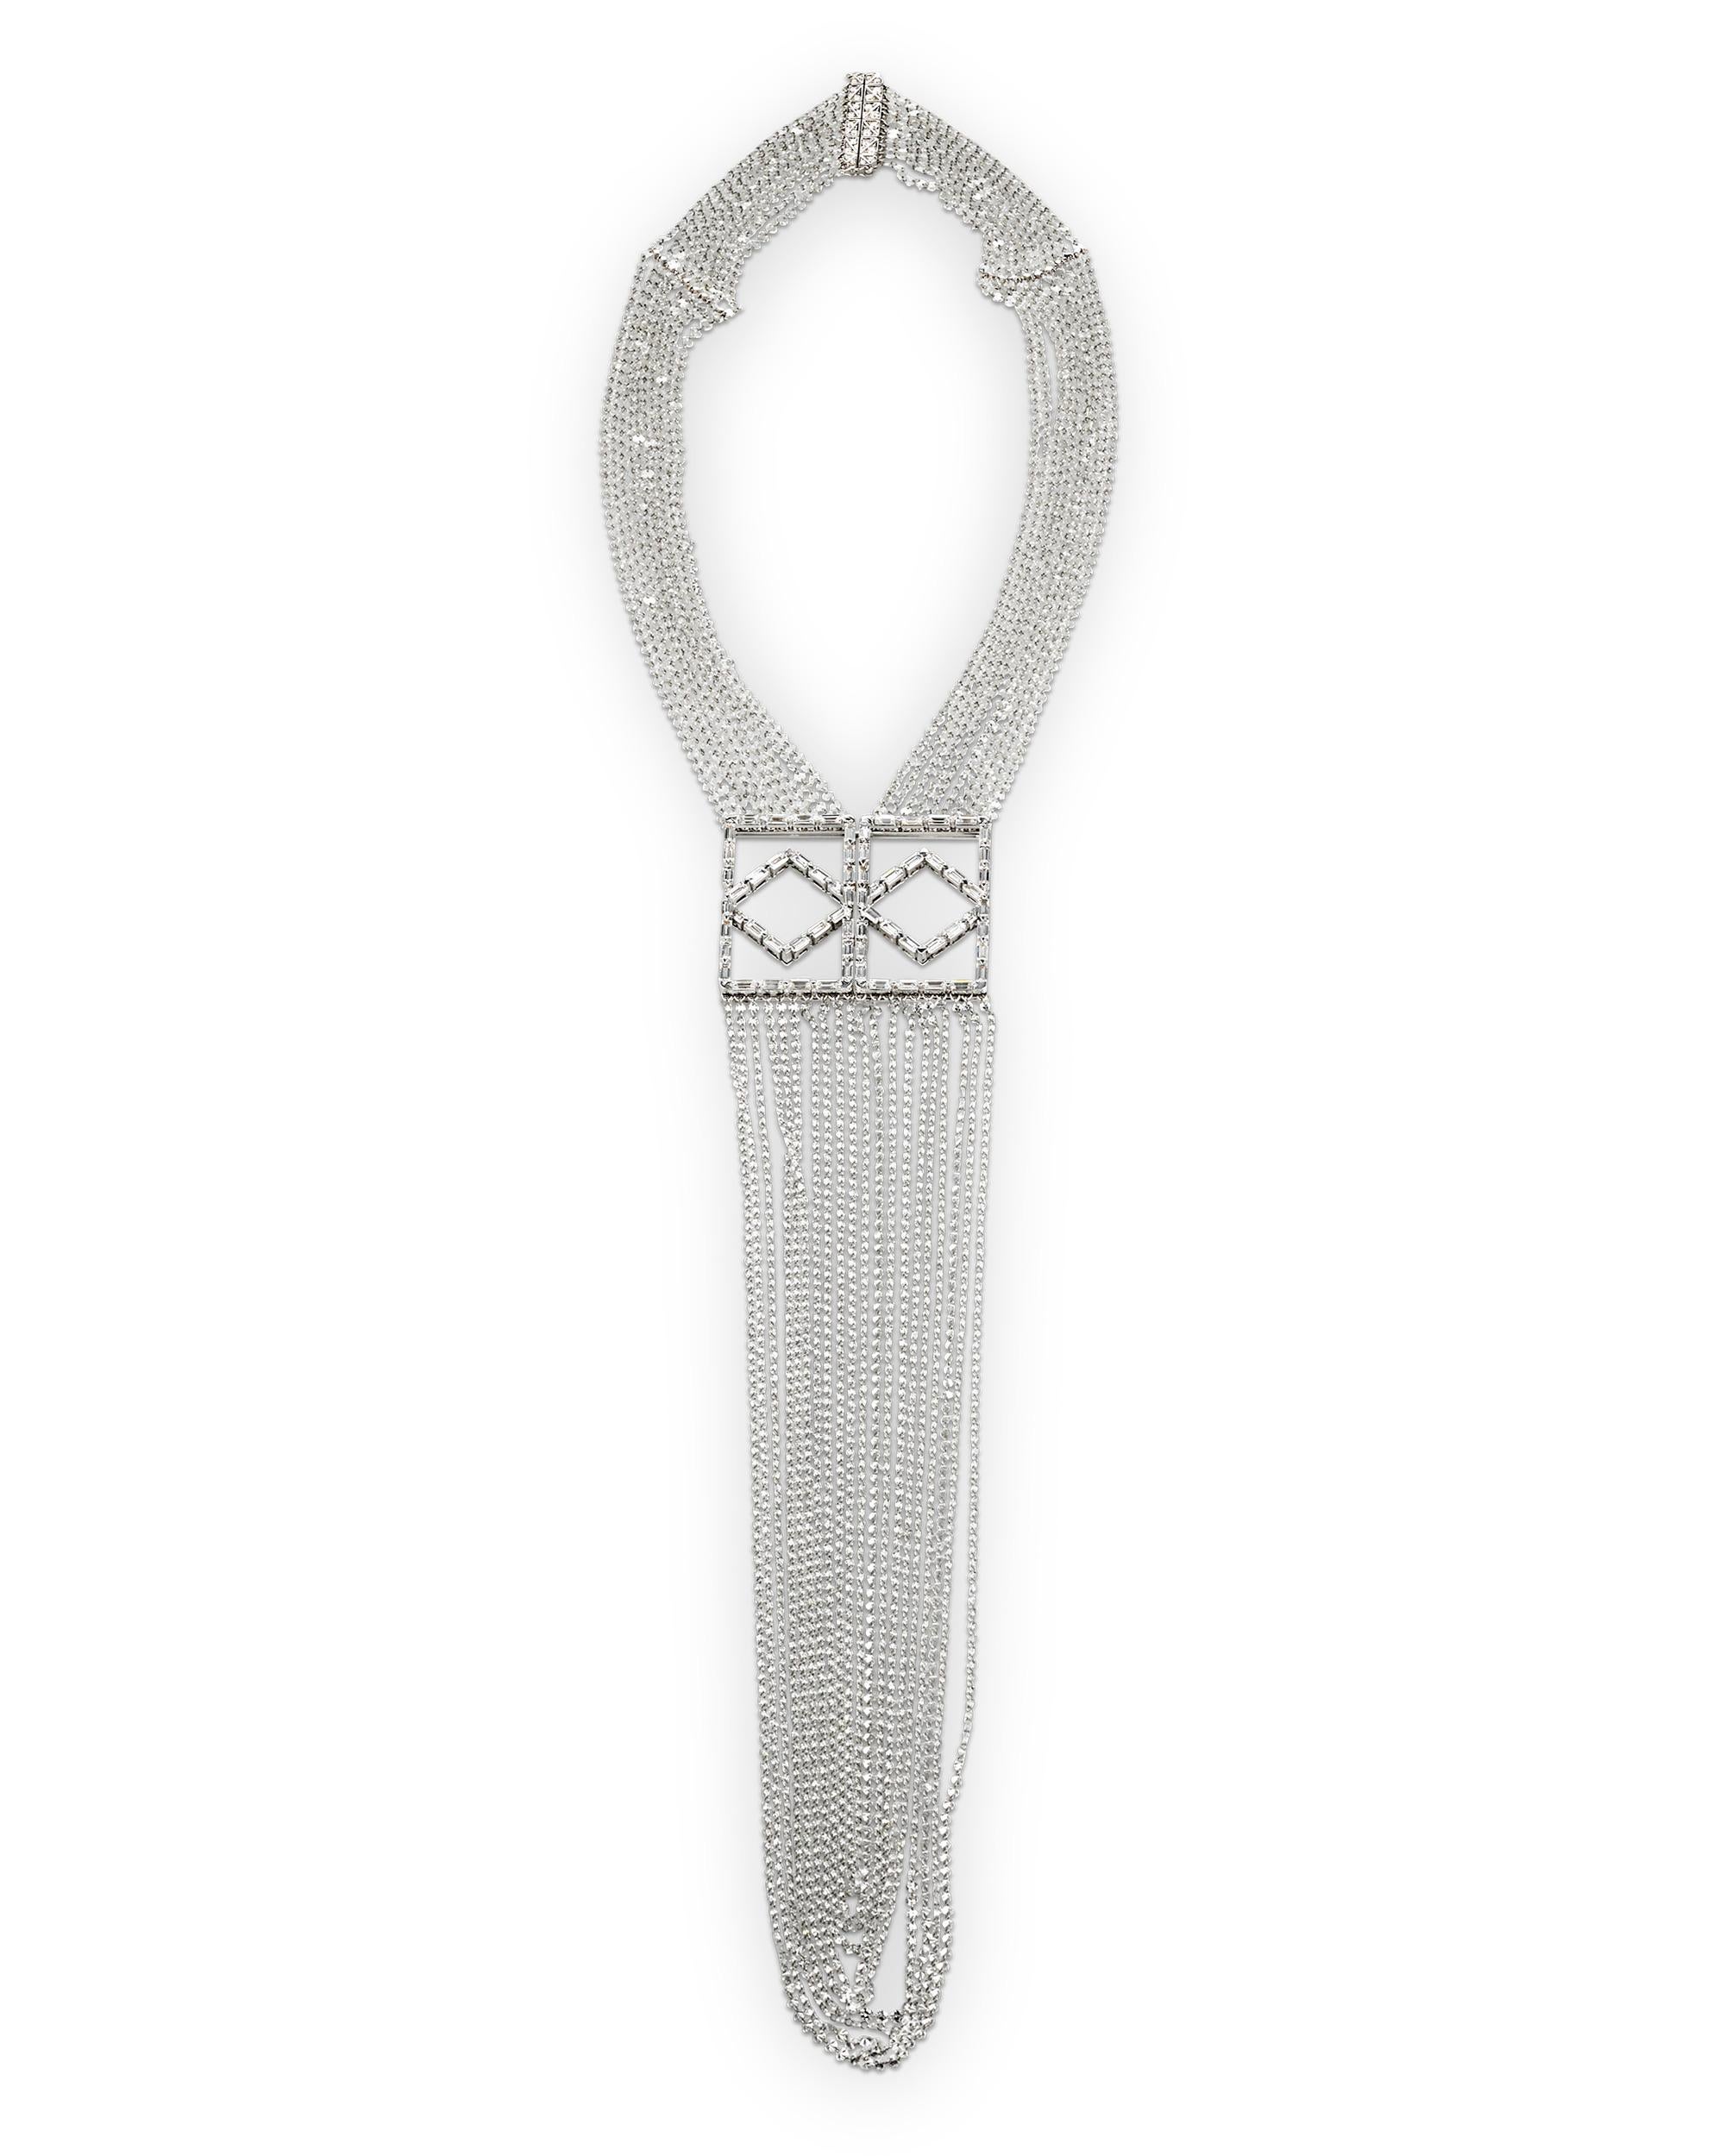 Hundreds of white diamond beads form the strands of this luxurious Art Deco-inspired necklace. It is a bold variation on the classic diamond necklace, sparkling from each angle with an astounding 98.89 total carats of diamonds. The beaded design